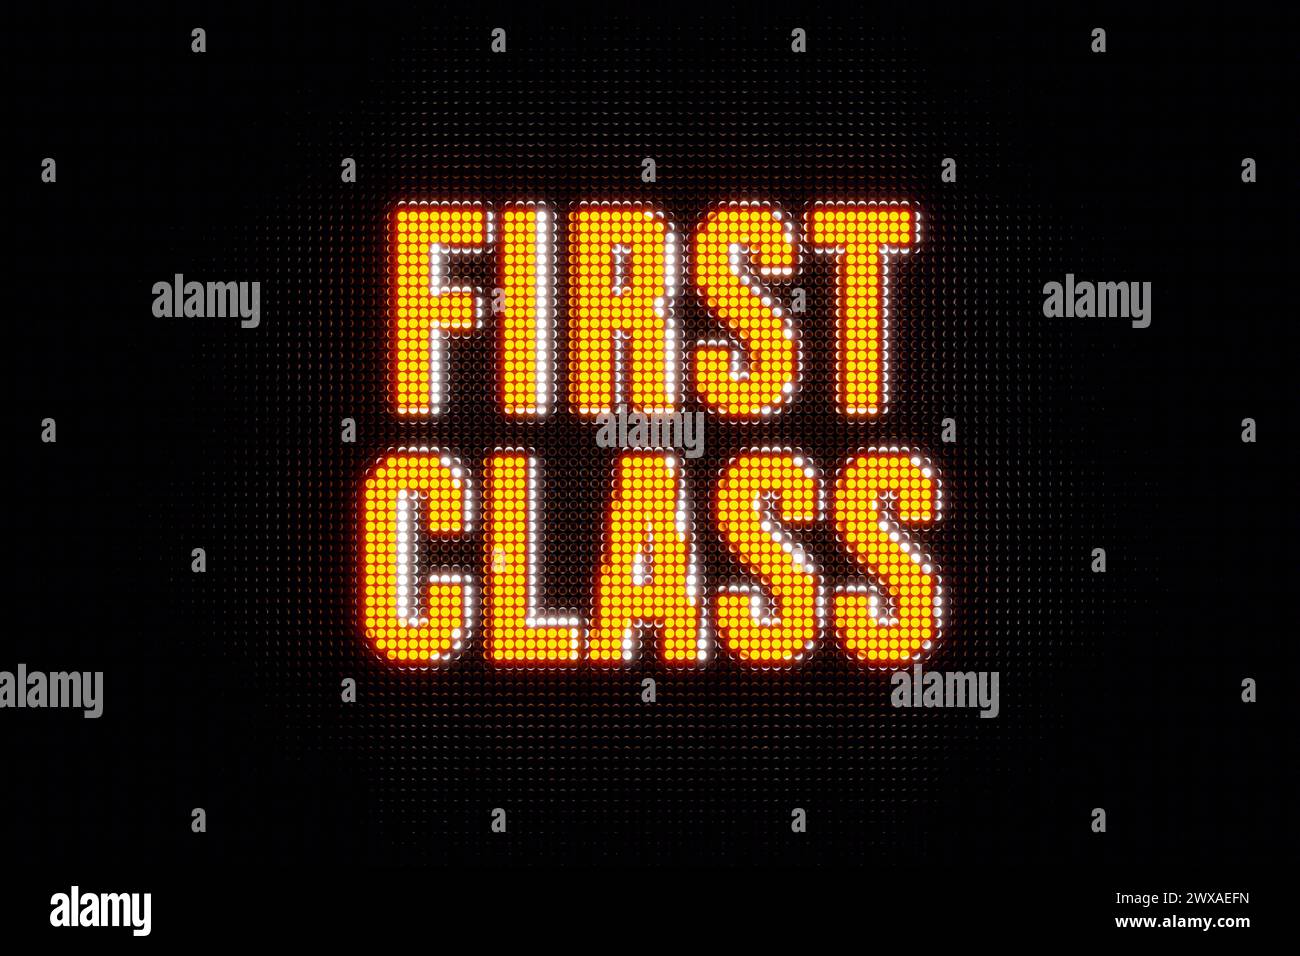 First Class. First Class. Banner in yellow capital letters. The text, bfirst class, illuminated. PRemium, VIP, business lounge, splendid, red carpet, Stock Photo